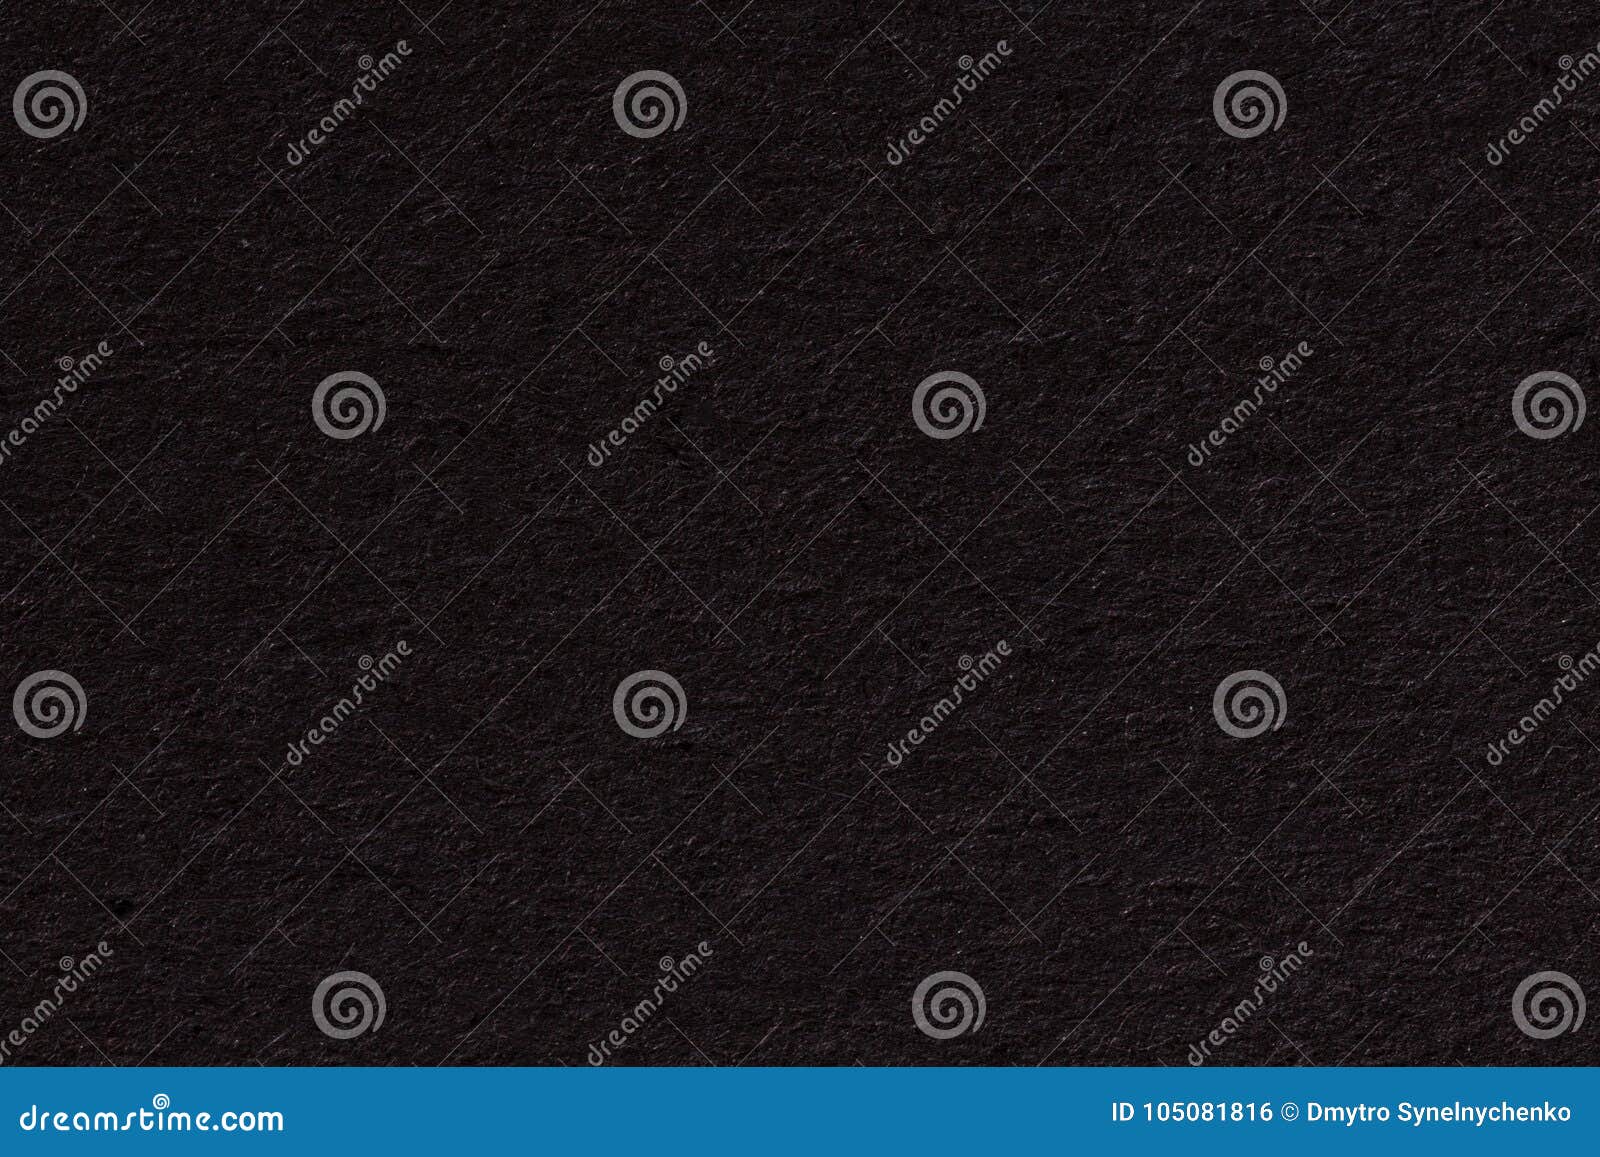 Black Paper Texture or Background with Spotlight, Dark Tone. Stock ...